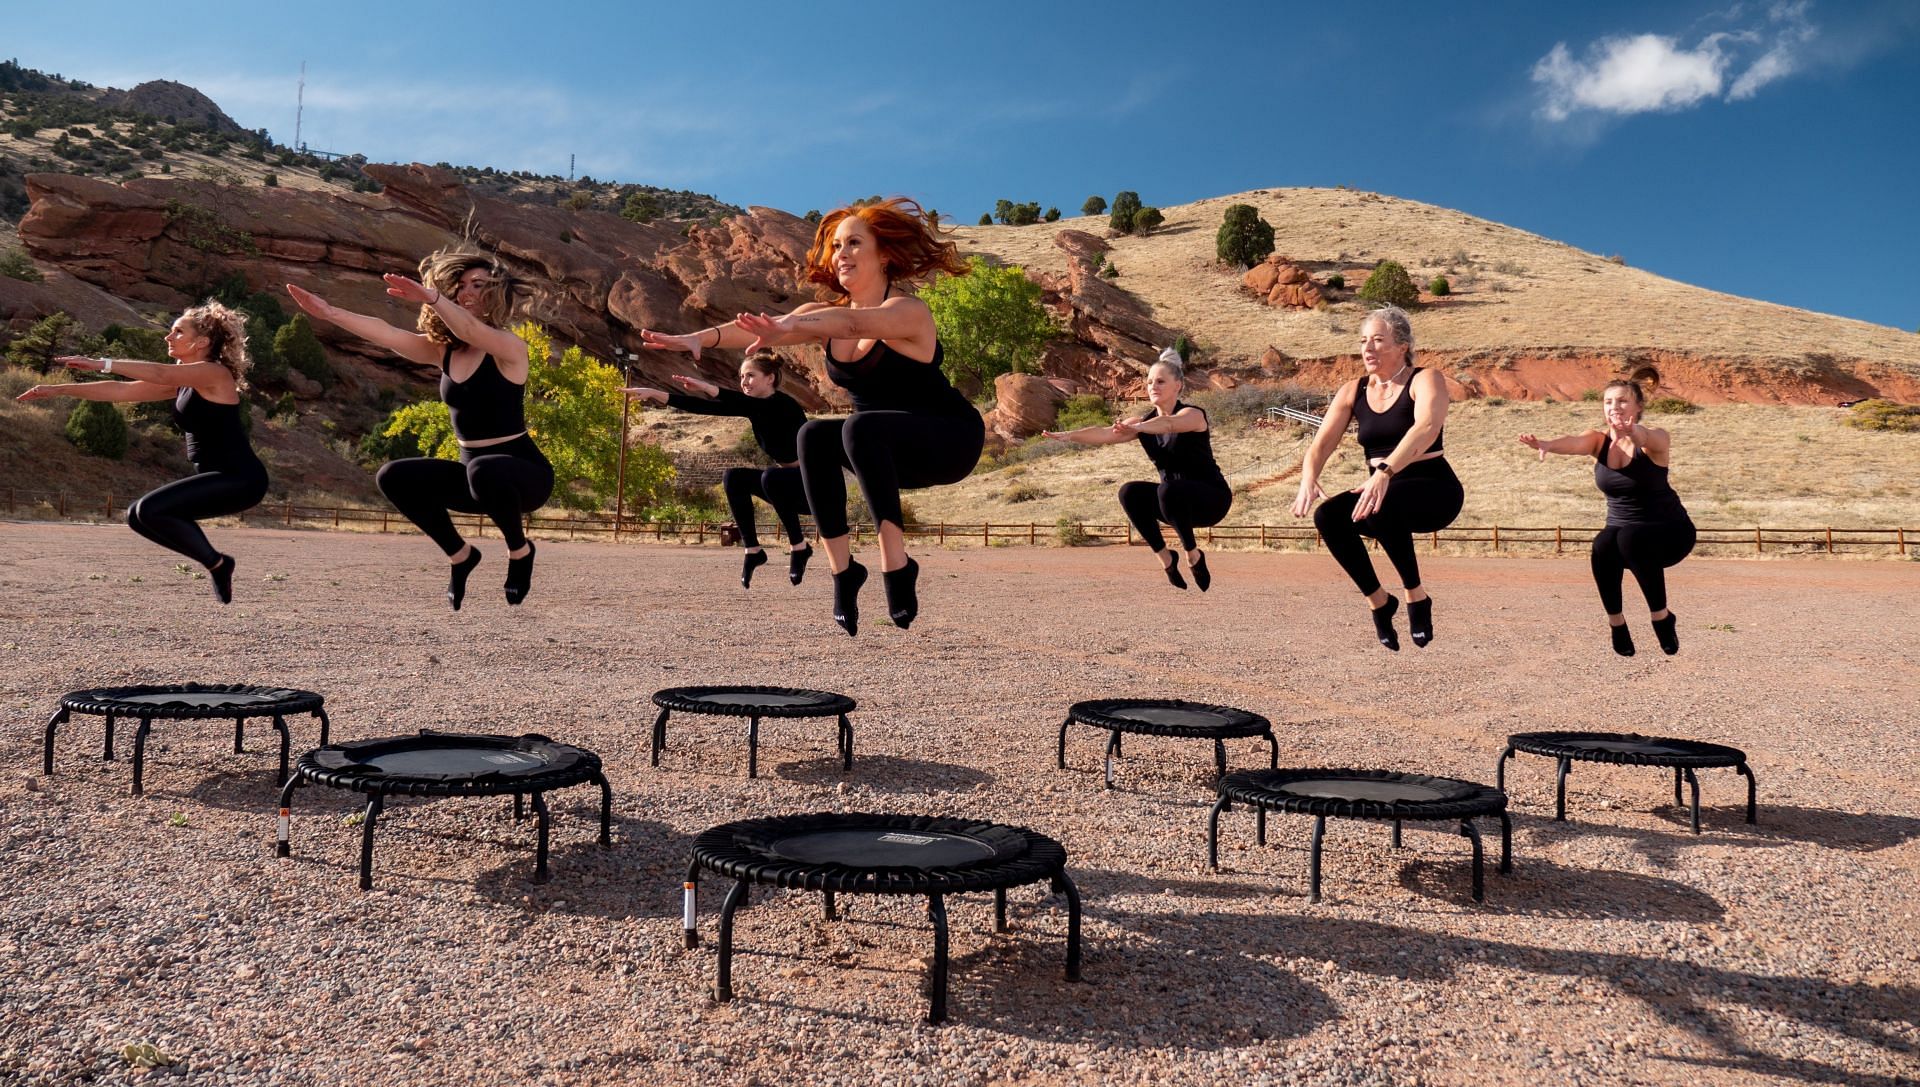 Trampoline rebounding can be a fun way to exercise (Image via Unsplash @Memento Media)